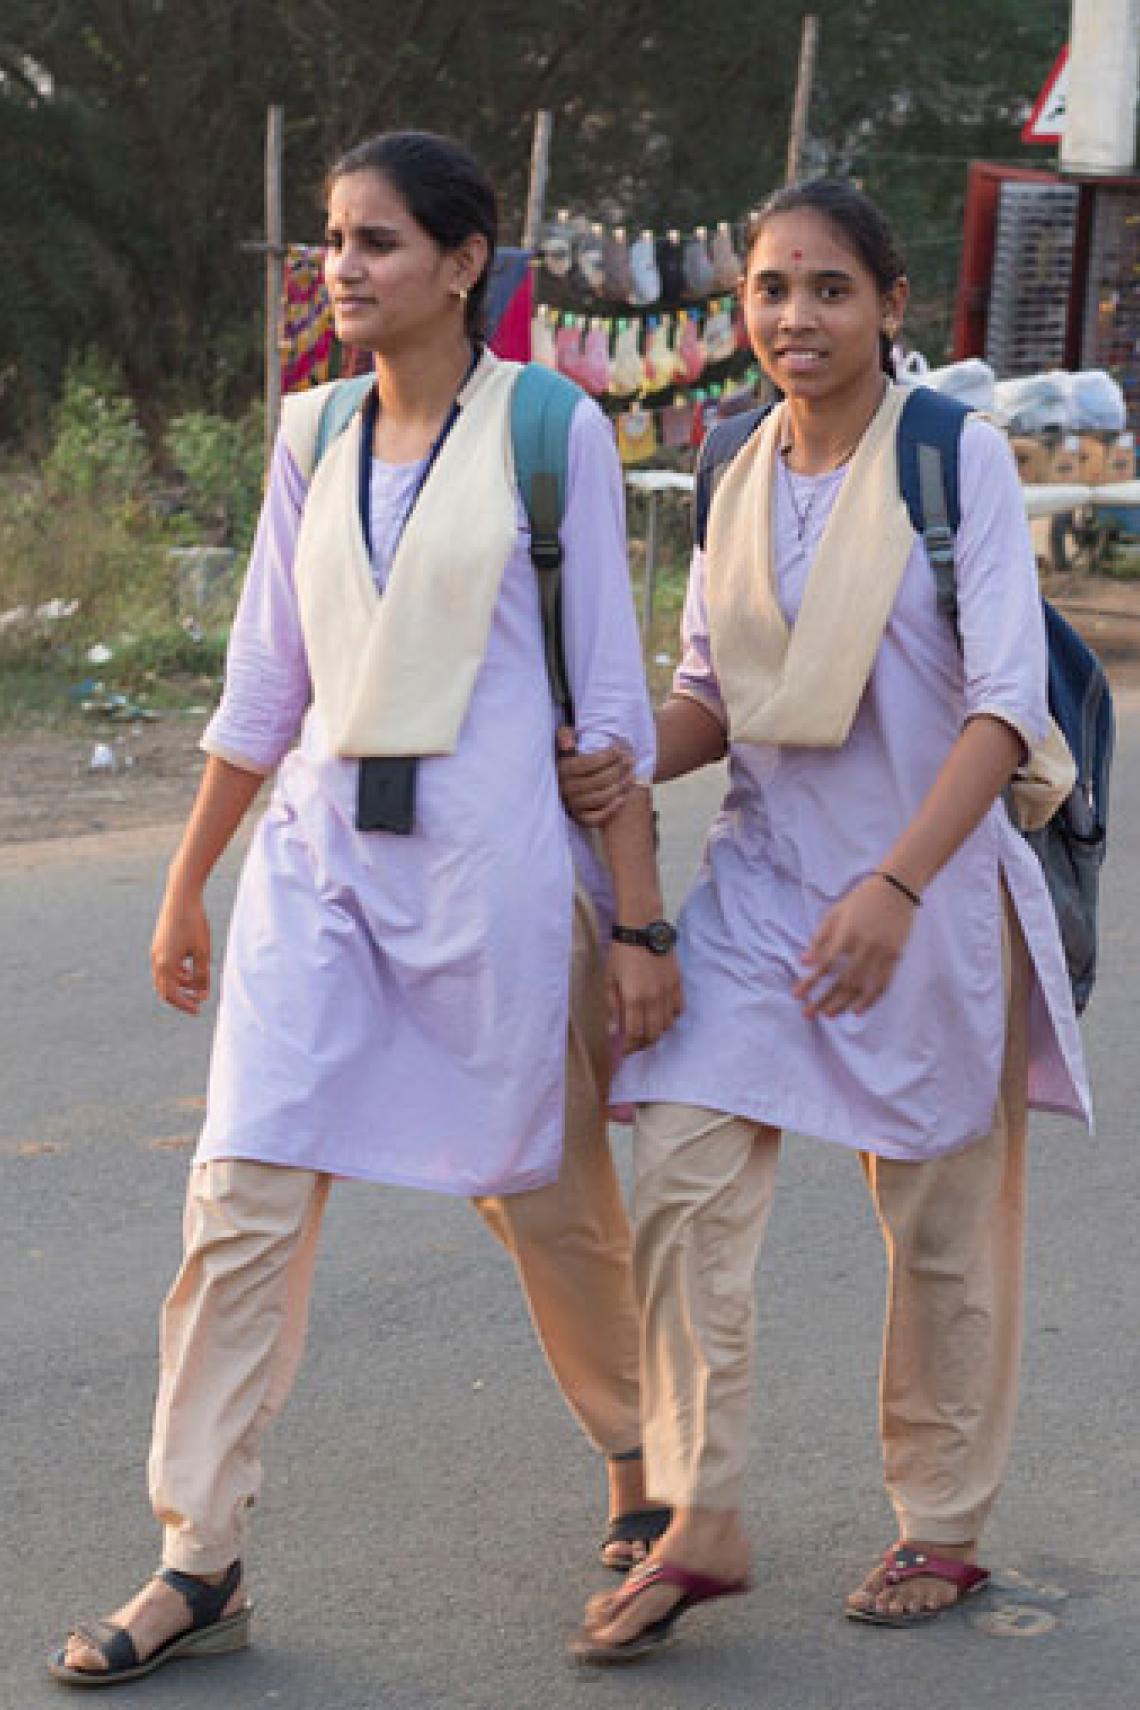 Two young women walking on a street in India